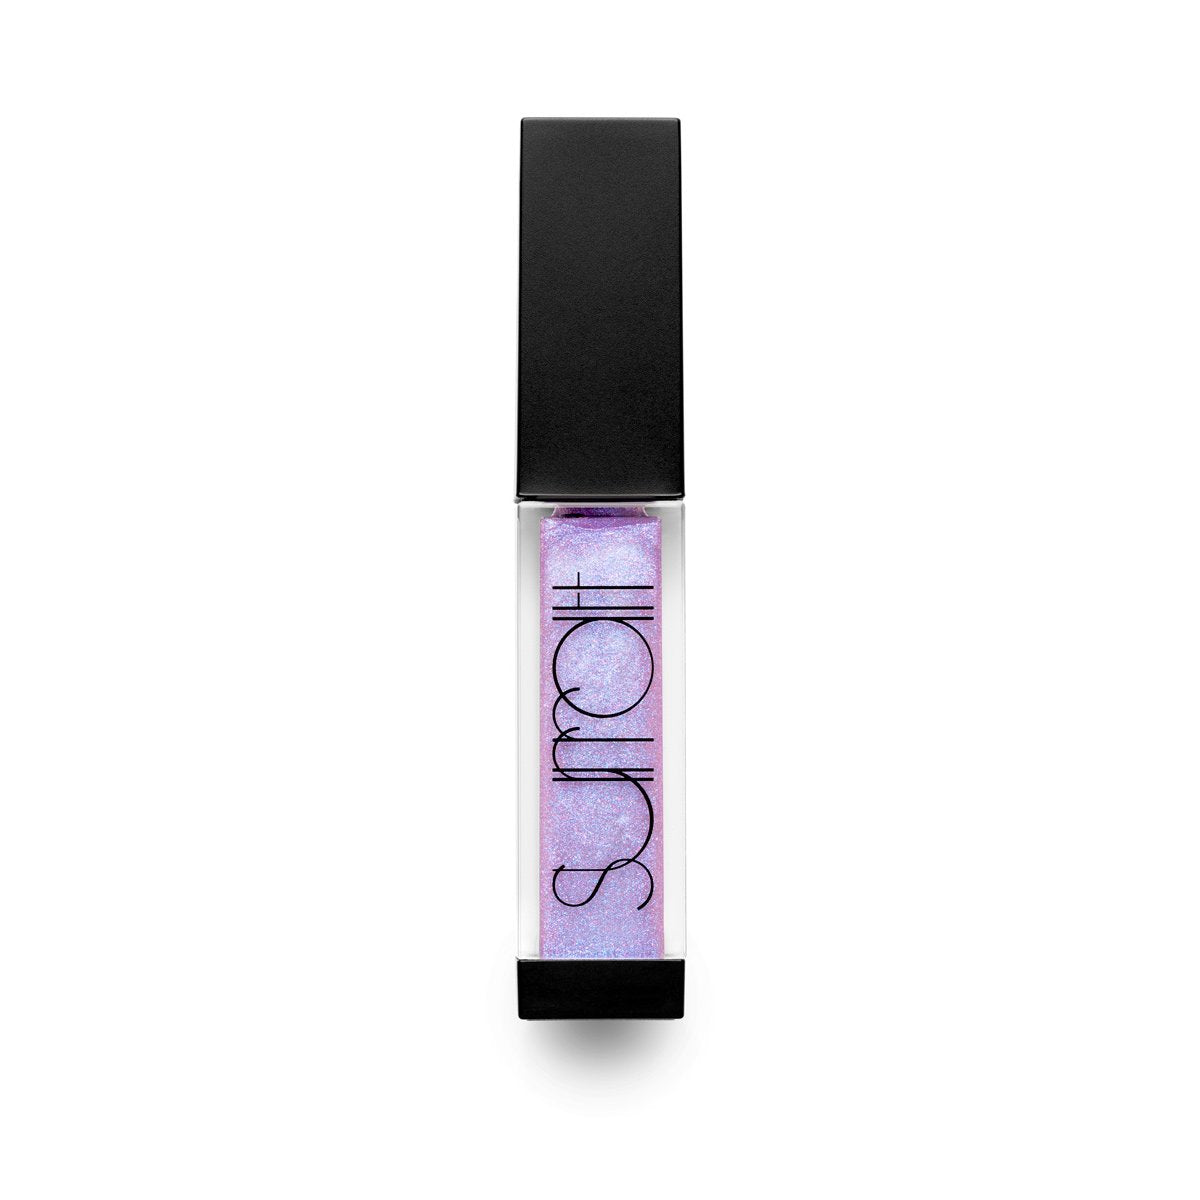 AMETHYSTE - IRIDESCENT SHEER VIOLET WITH DUOCHROME SHIMMER - high shine lip gloss in iridescent sheer violet shade with duochrome glitter